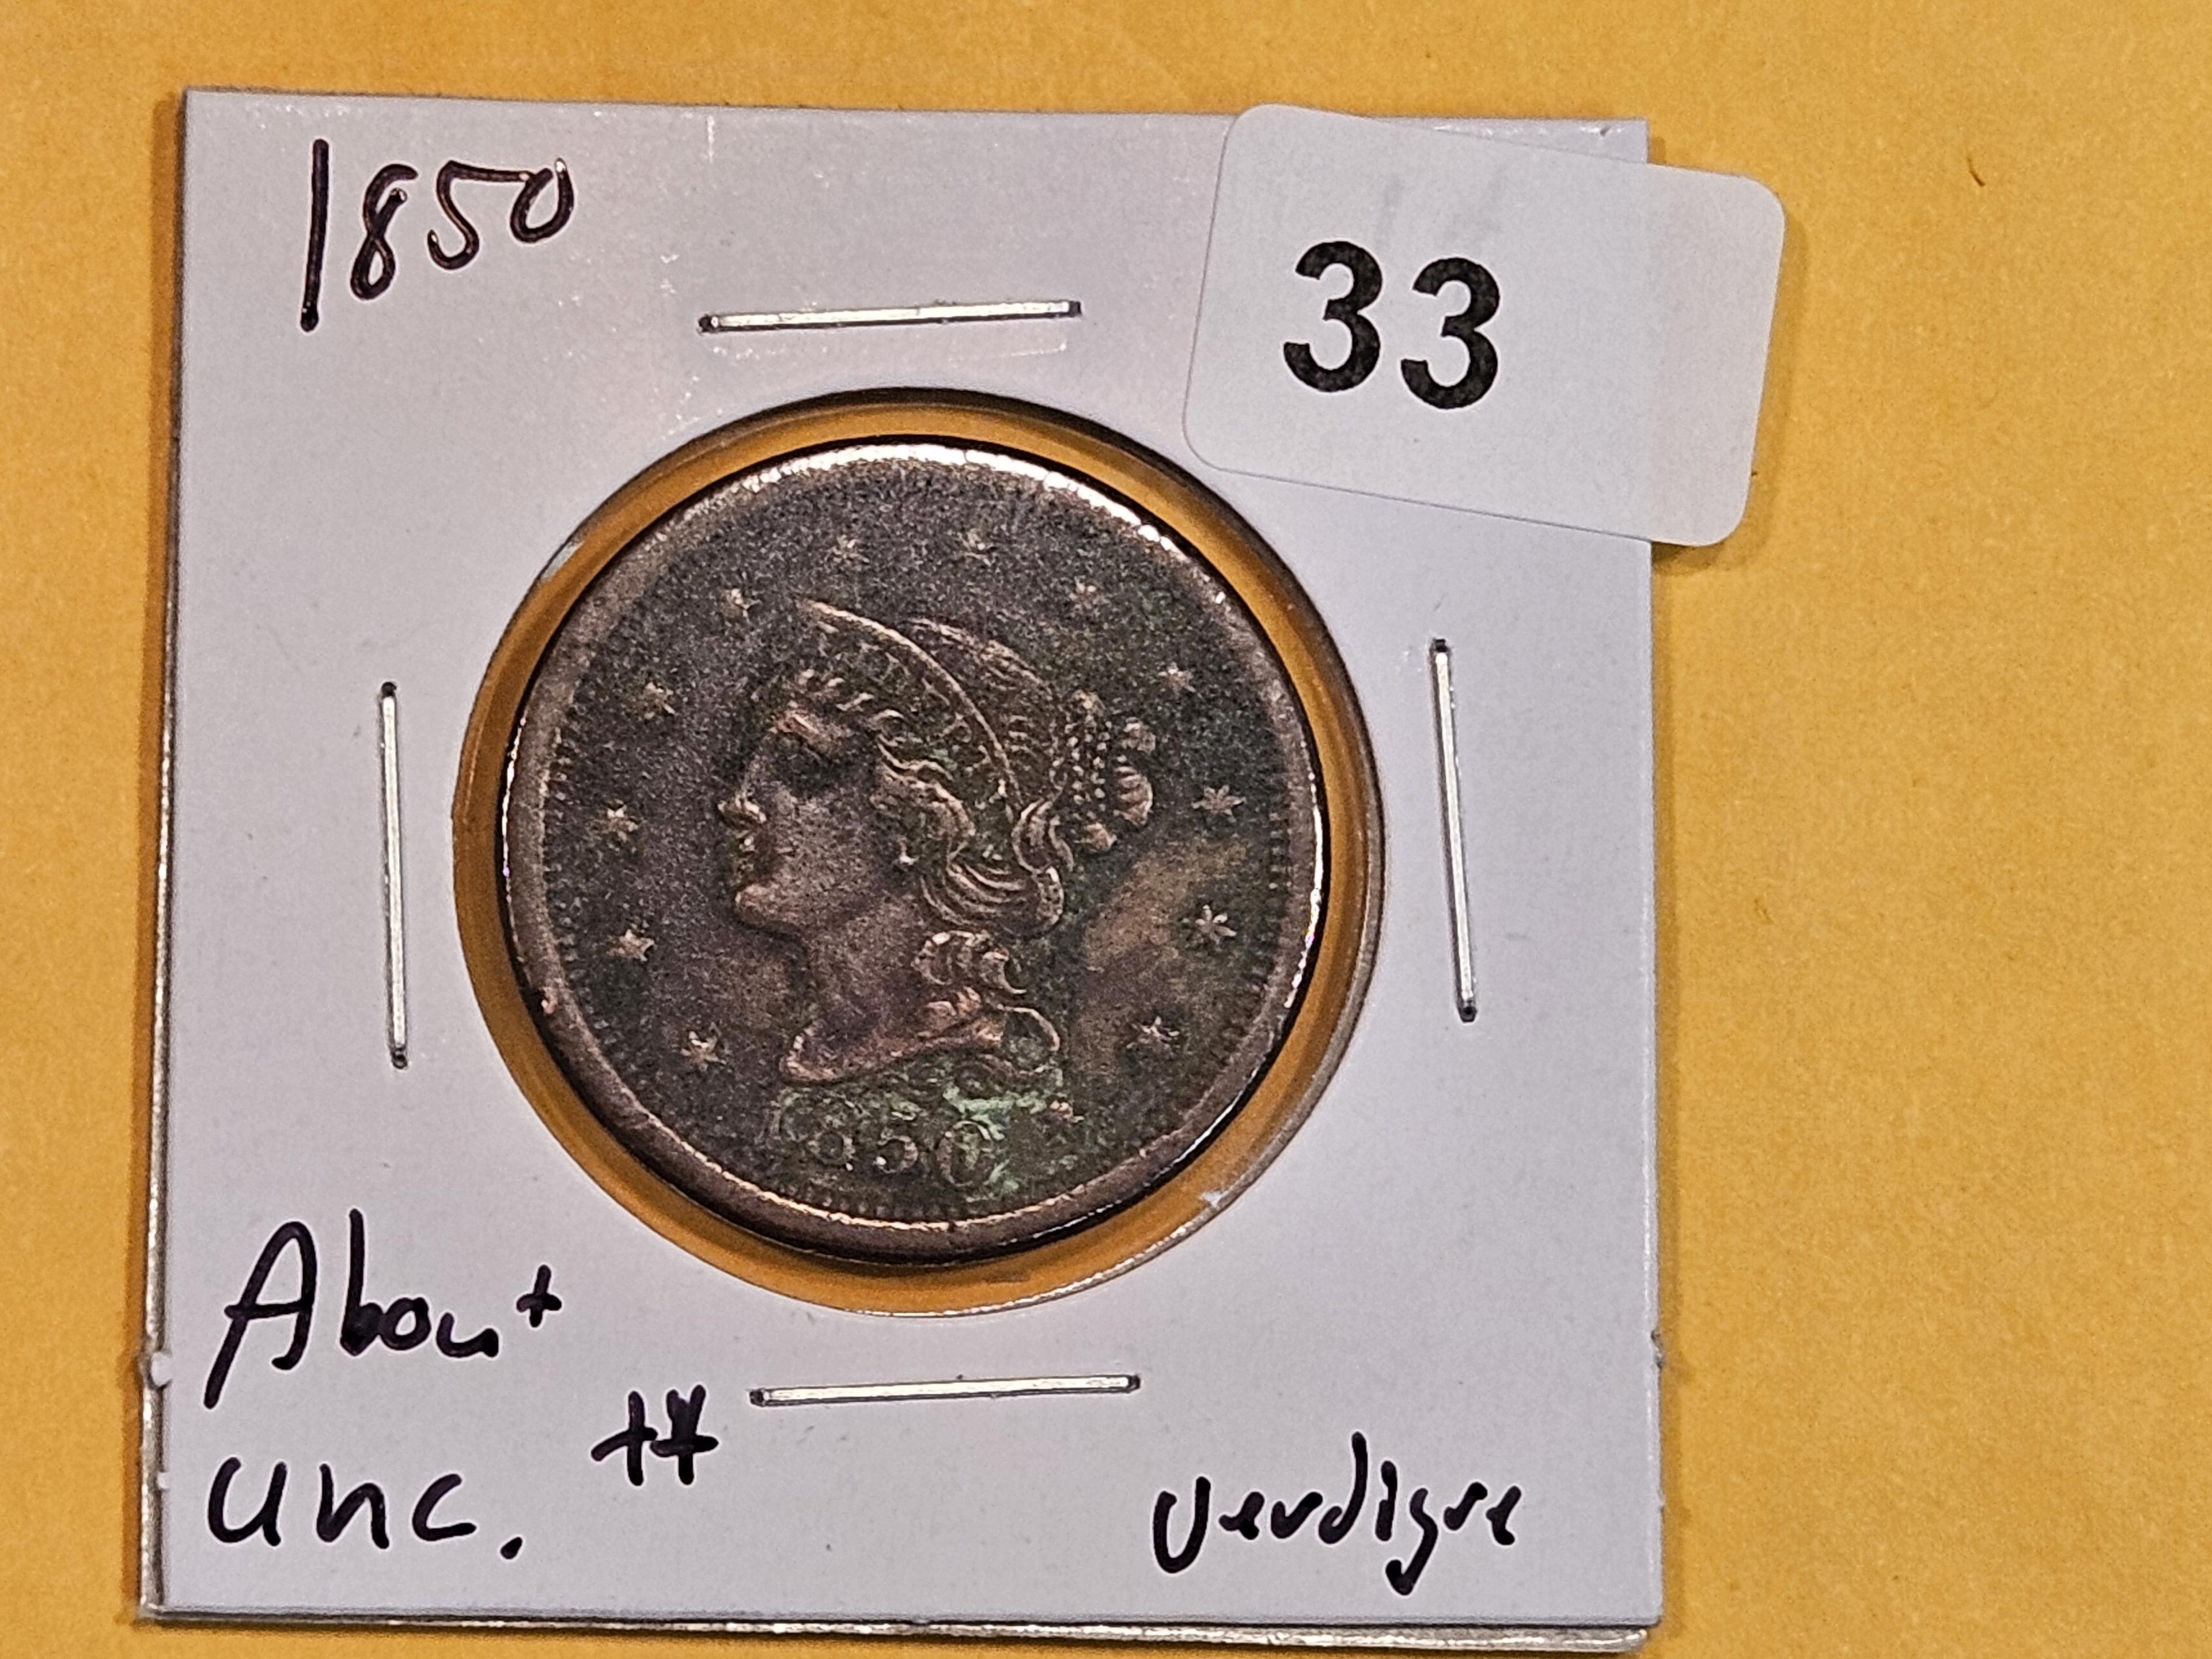 1850 Braided hair Large Cent in About Uncirculated ++ - details